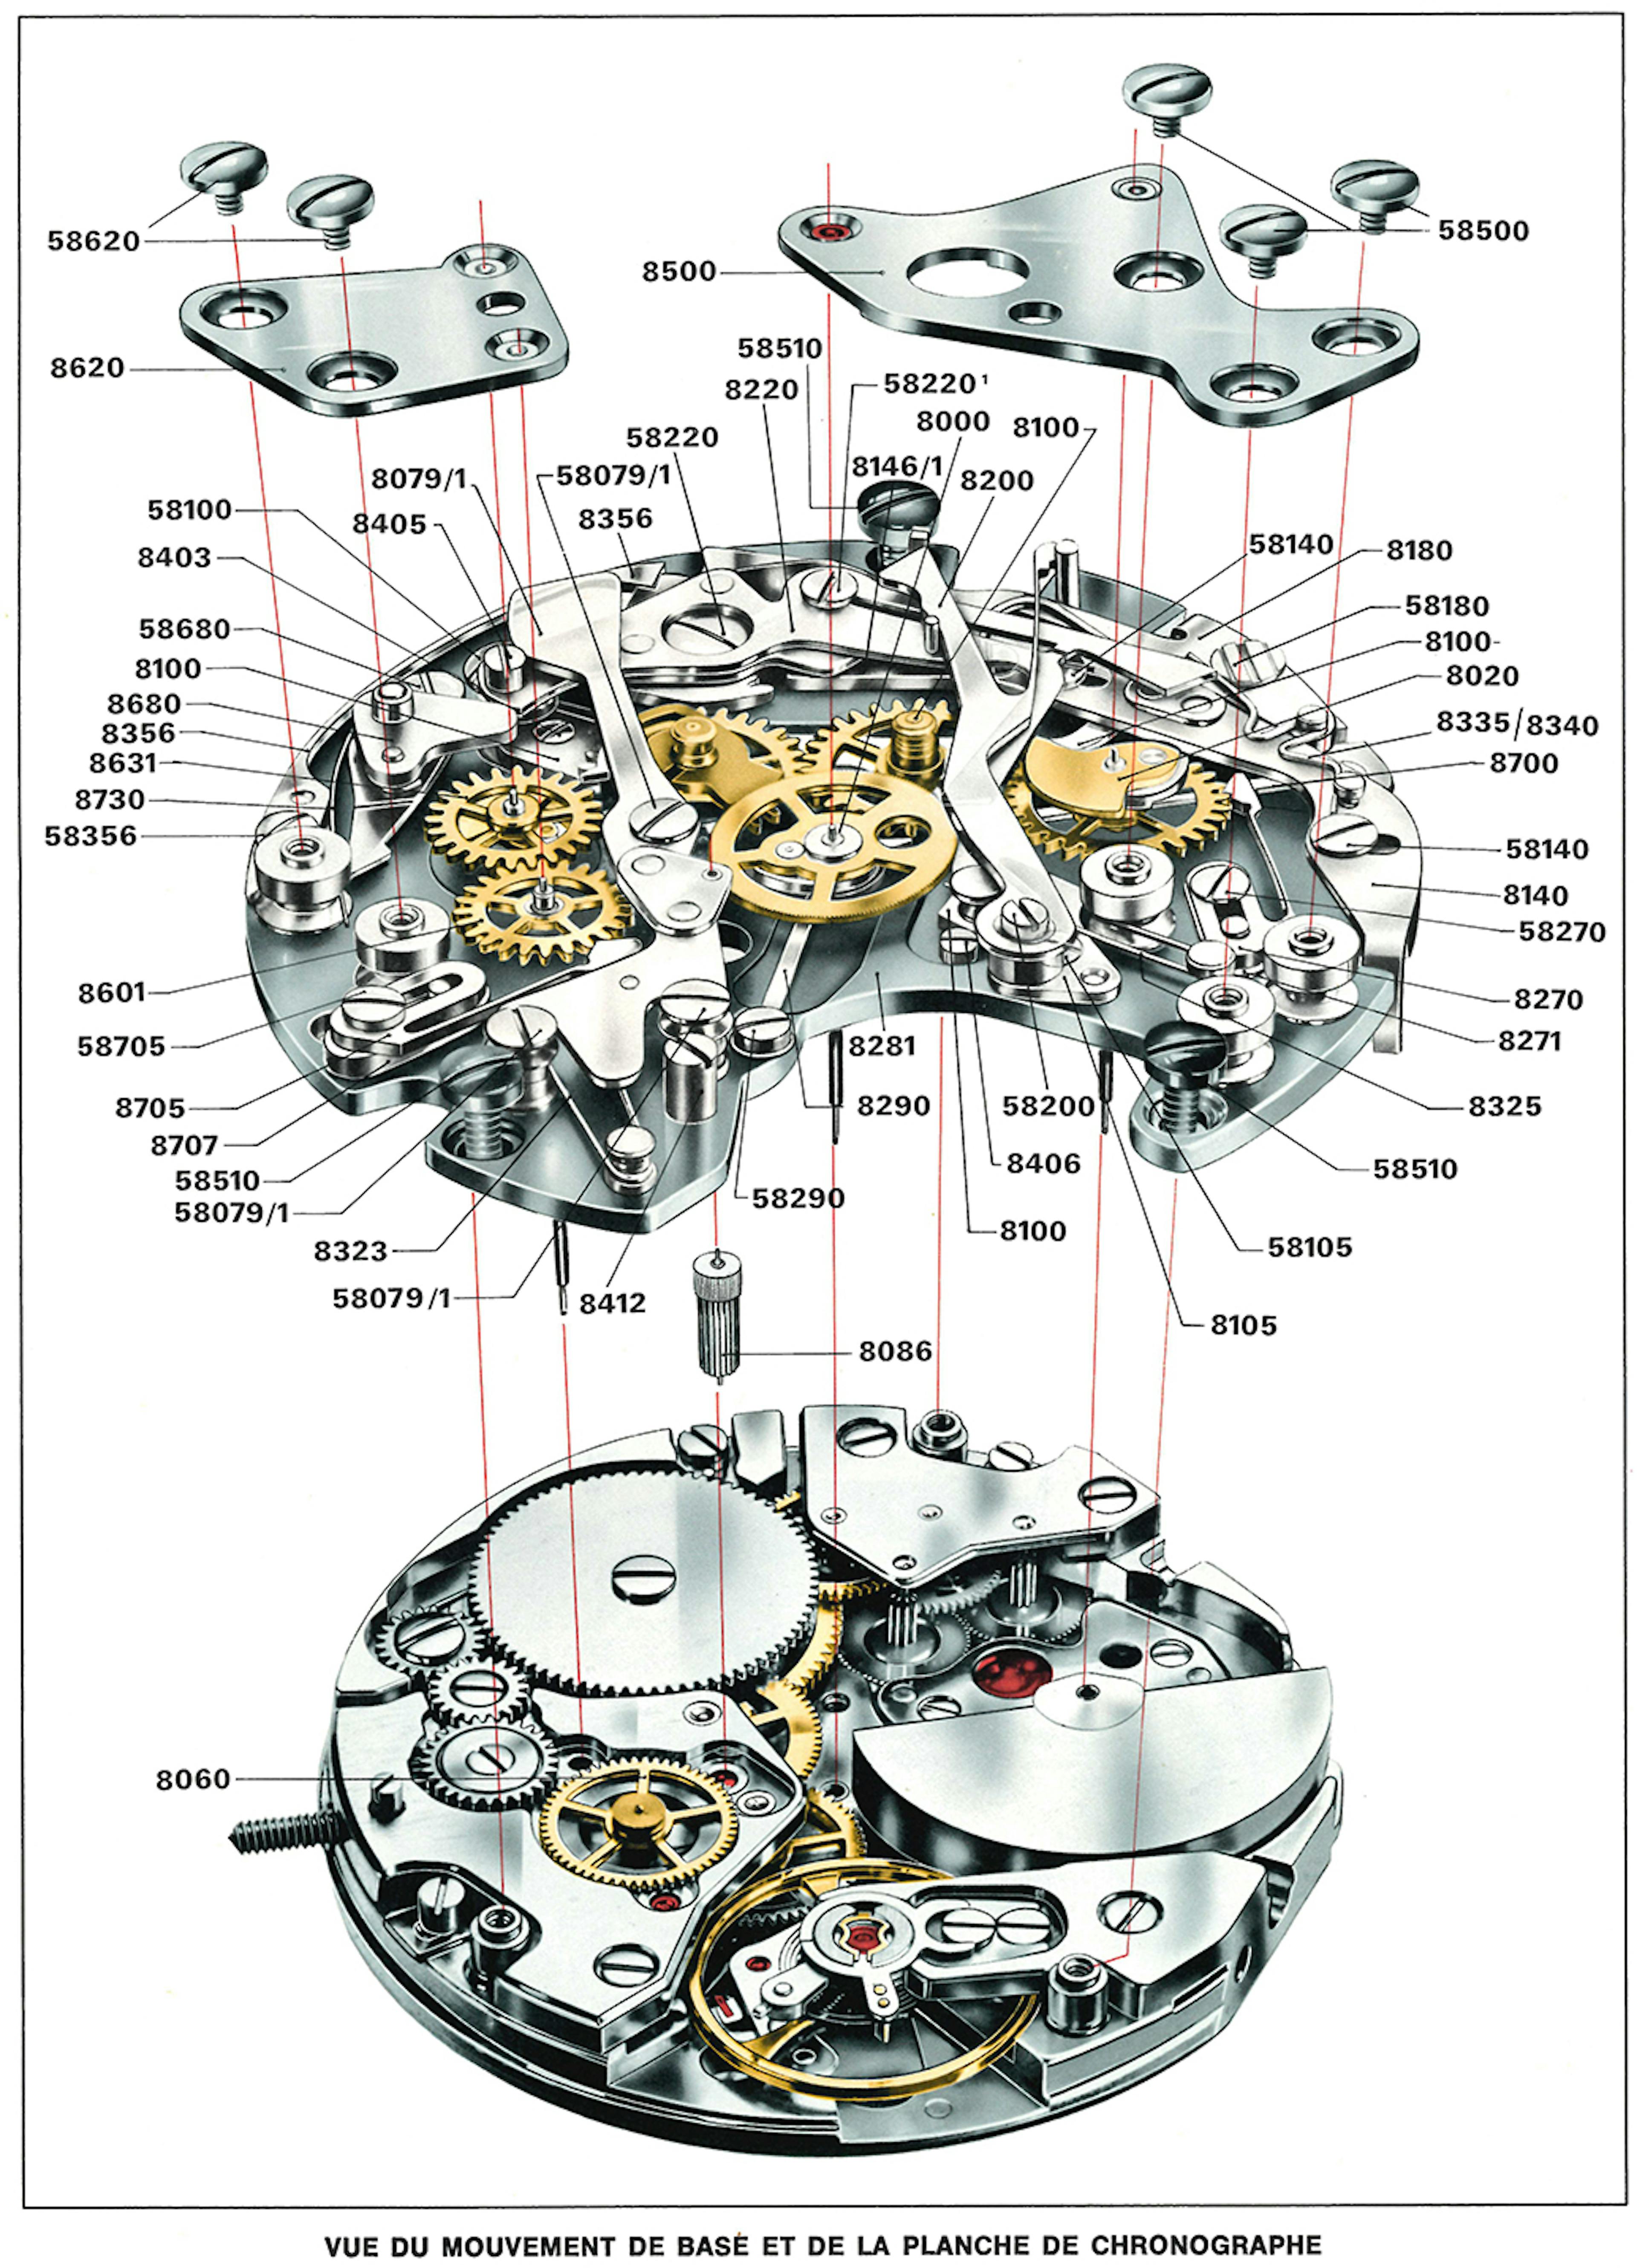 A technical drawing of the Project 99 movement, that became the Heuer Calibre 11. 